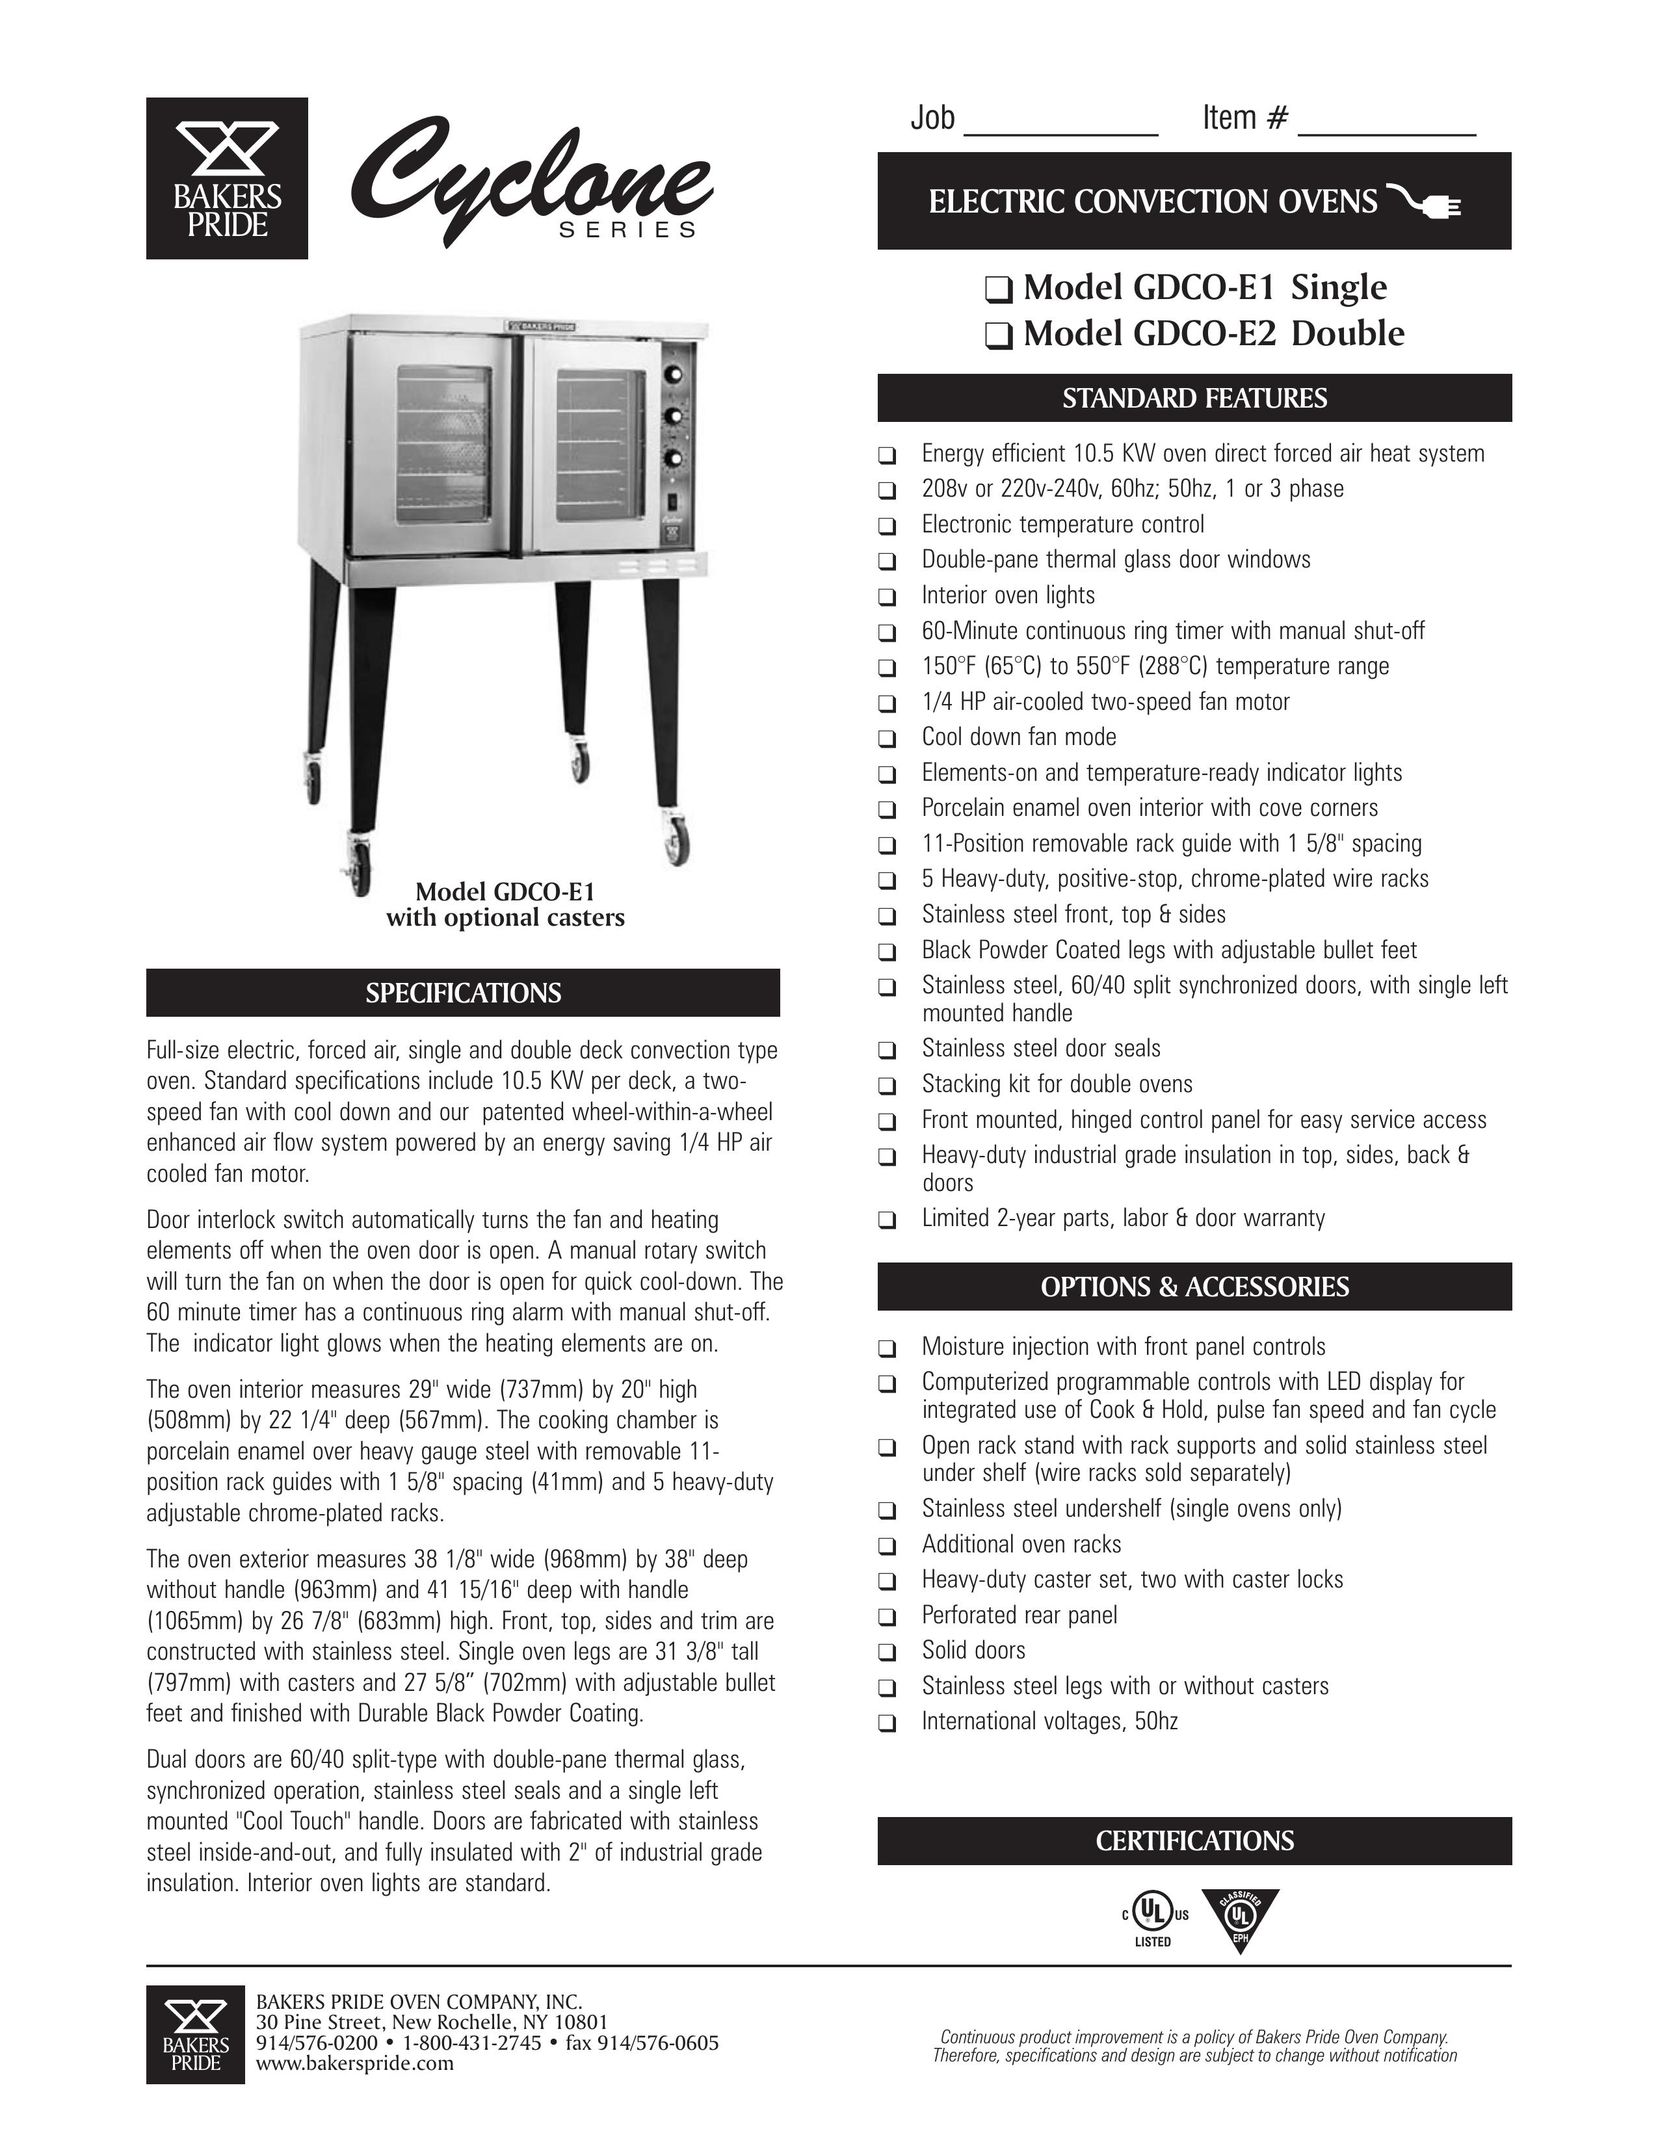 Bakers Pride Oven GDCO-E2 Double Convection Oven User Manual